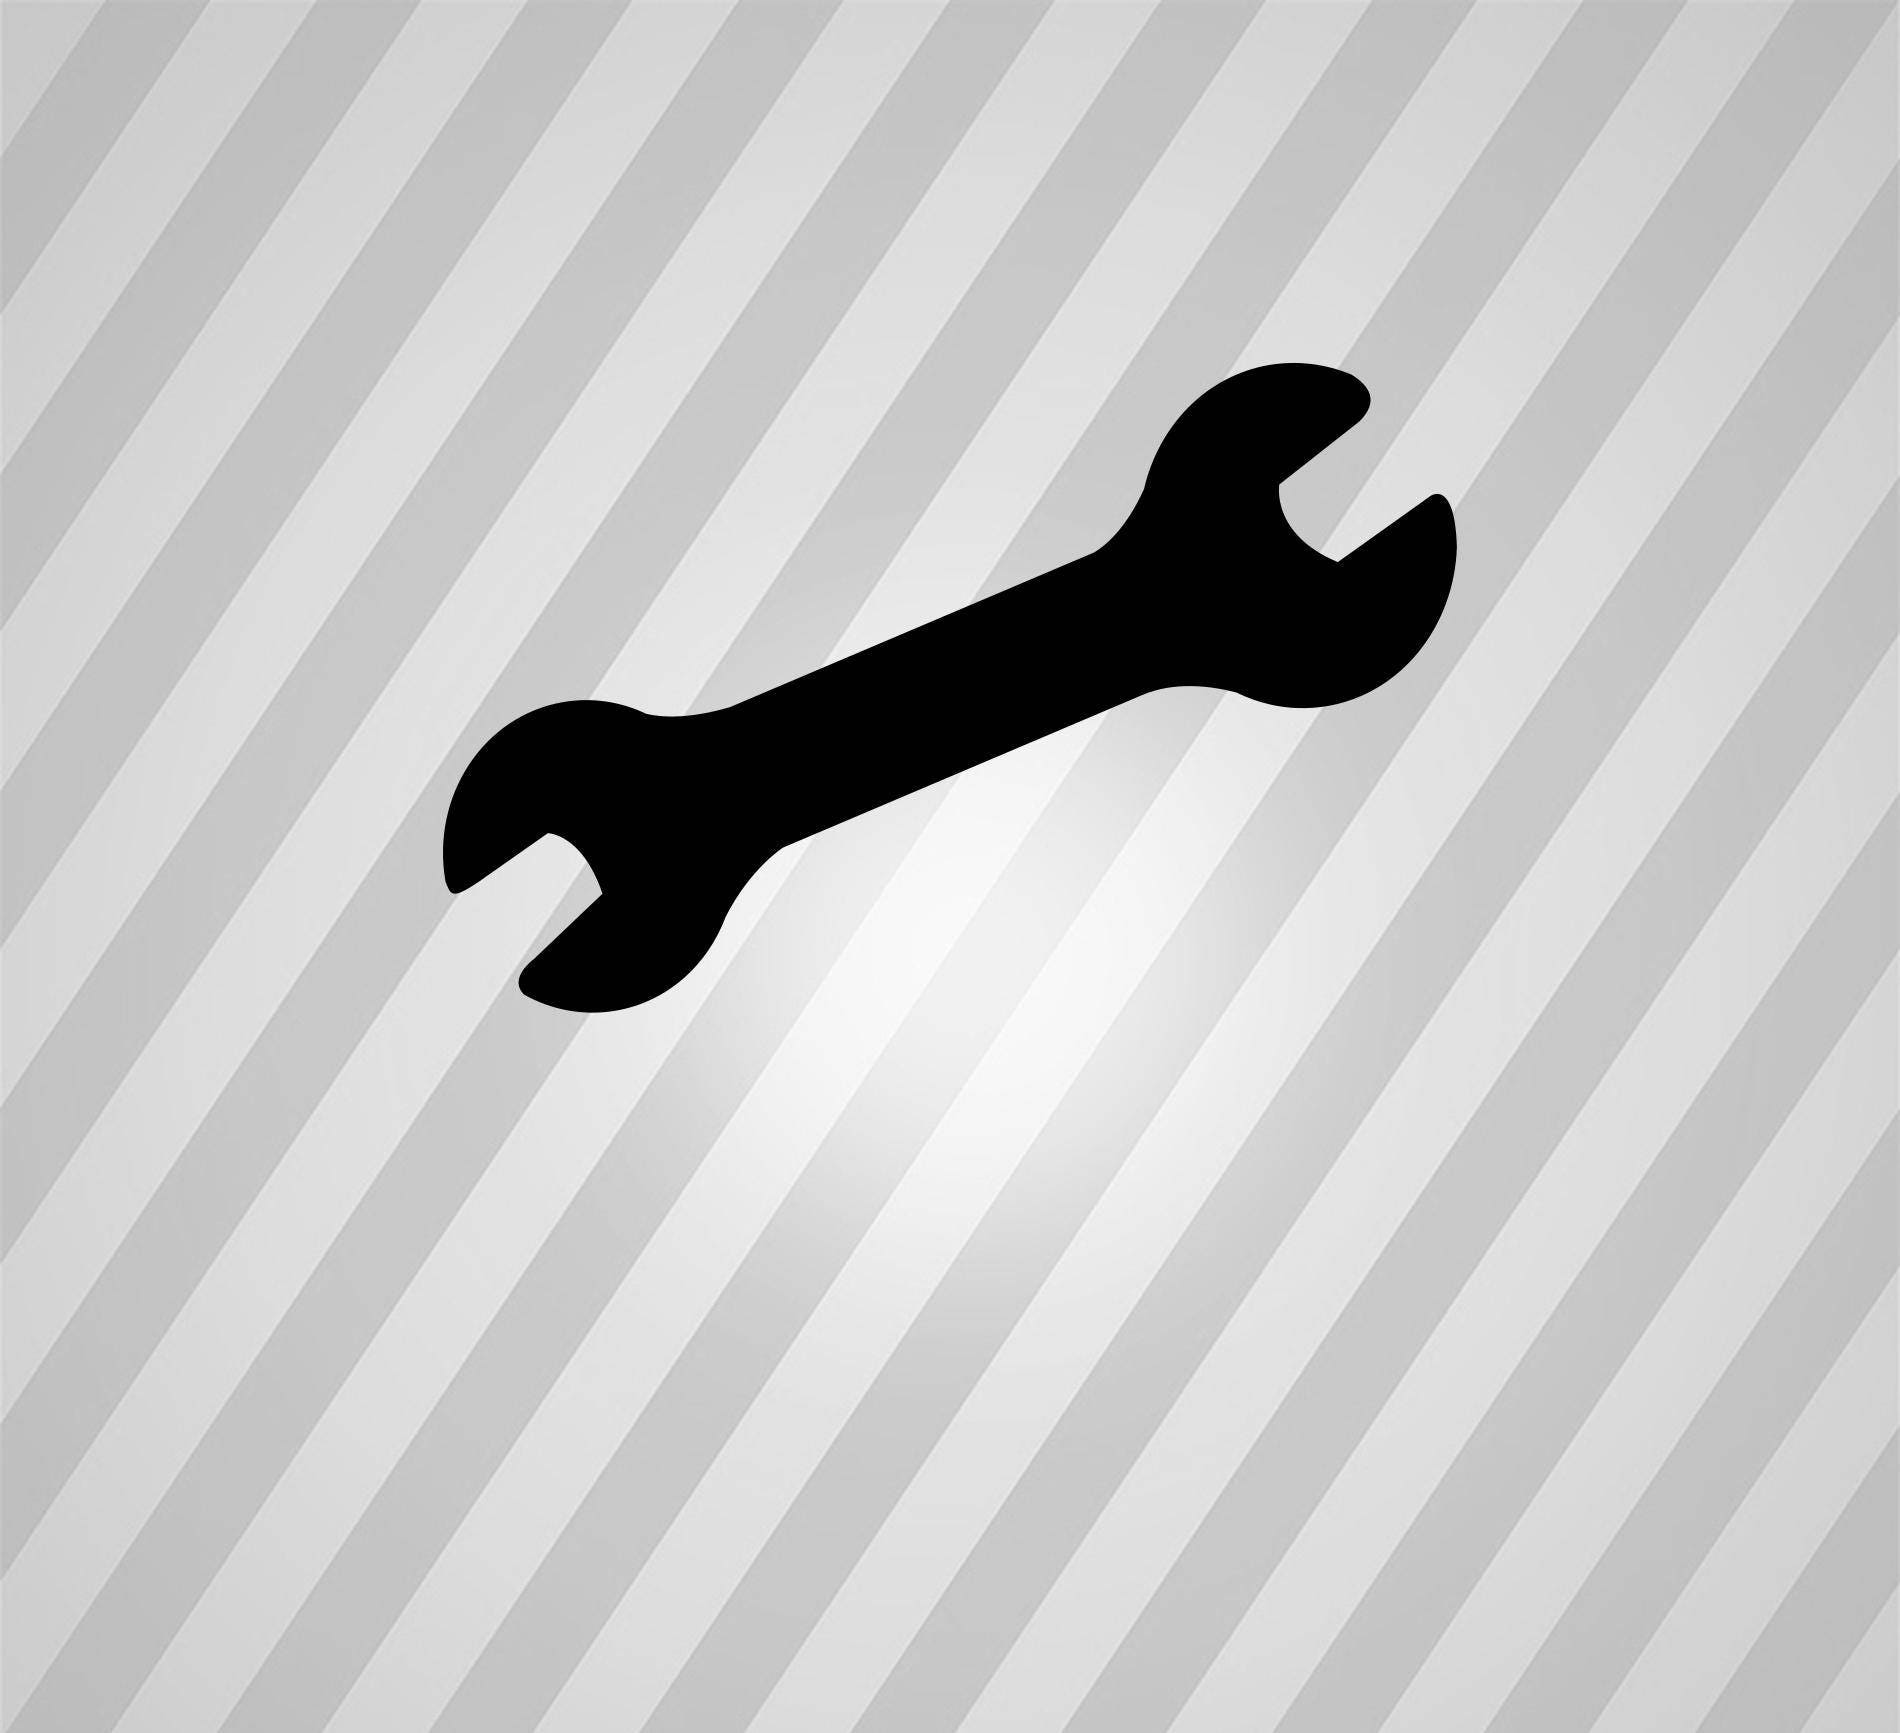  Wrench  Silhouette Spanner Svg  Dxf Eps Silhouette Rld RDWorks